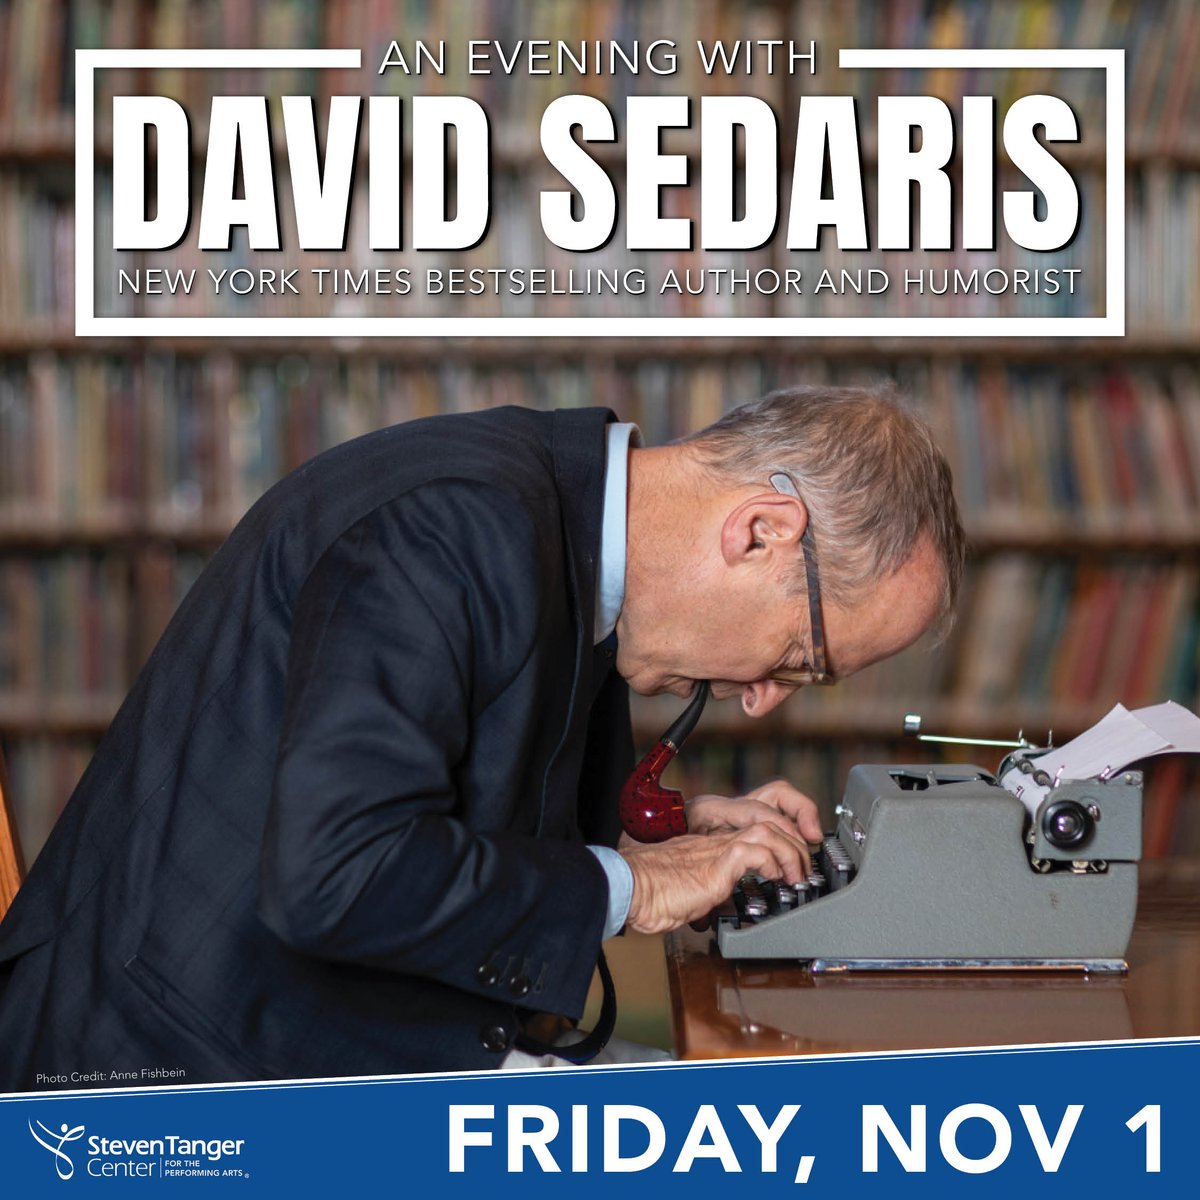 ON SALE NOW: David Sedaris returns to Tanger Center on Friday, November 1 following the release of his newest books, A Carnival of Snackery and Pretty Ugly. Get tickets: bit.ly/4dXQwjd